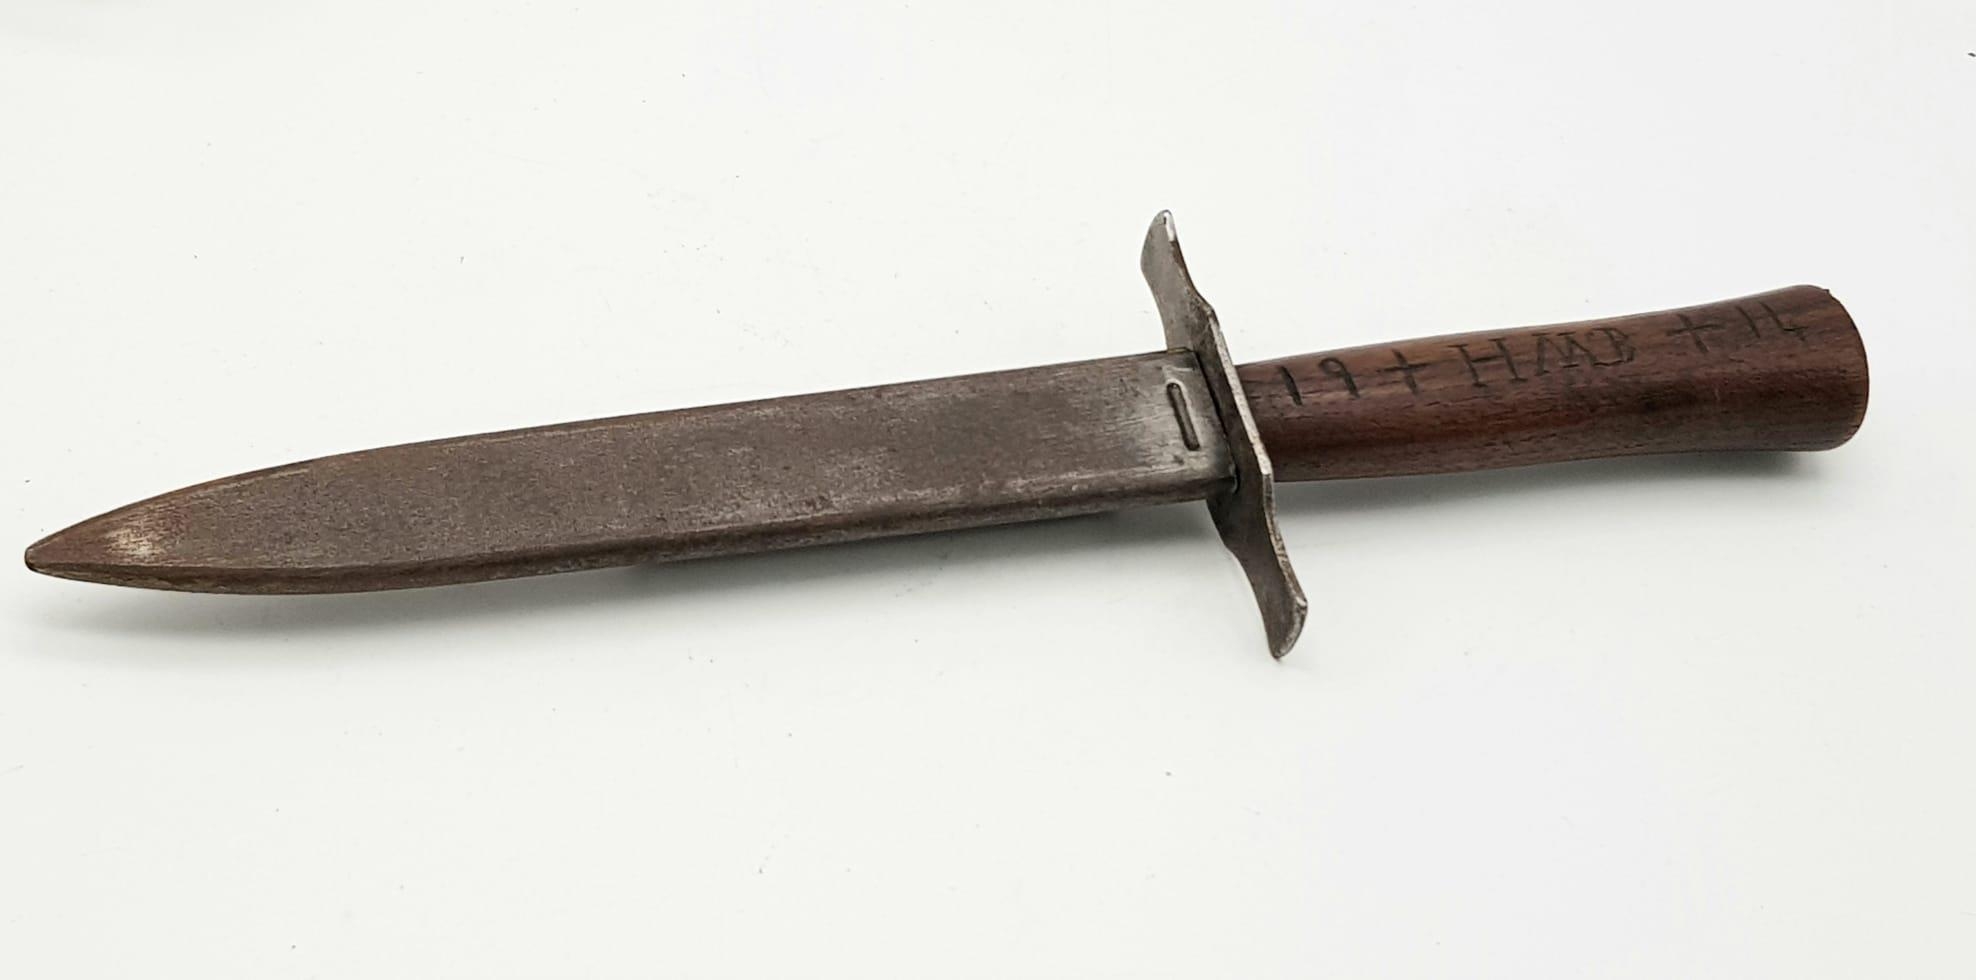 WW2 German Luftwaffe Pilots Boot Knife/Dagger. Wooden grip with tang secured by pins/rivets and a - Image 5 of 5